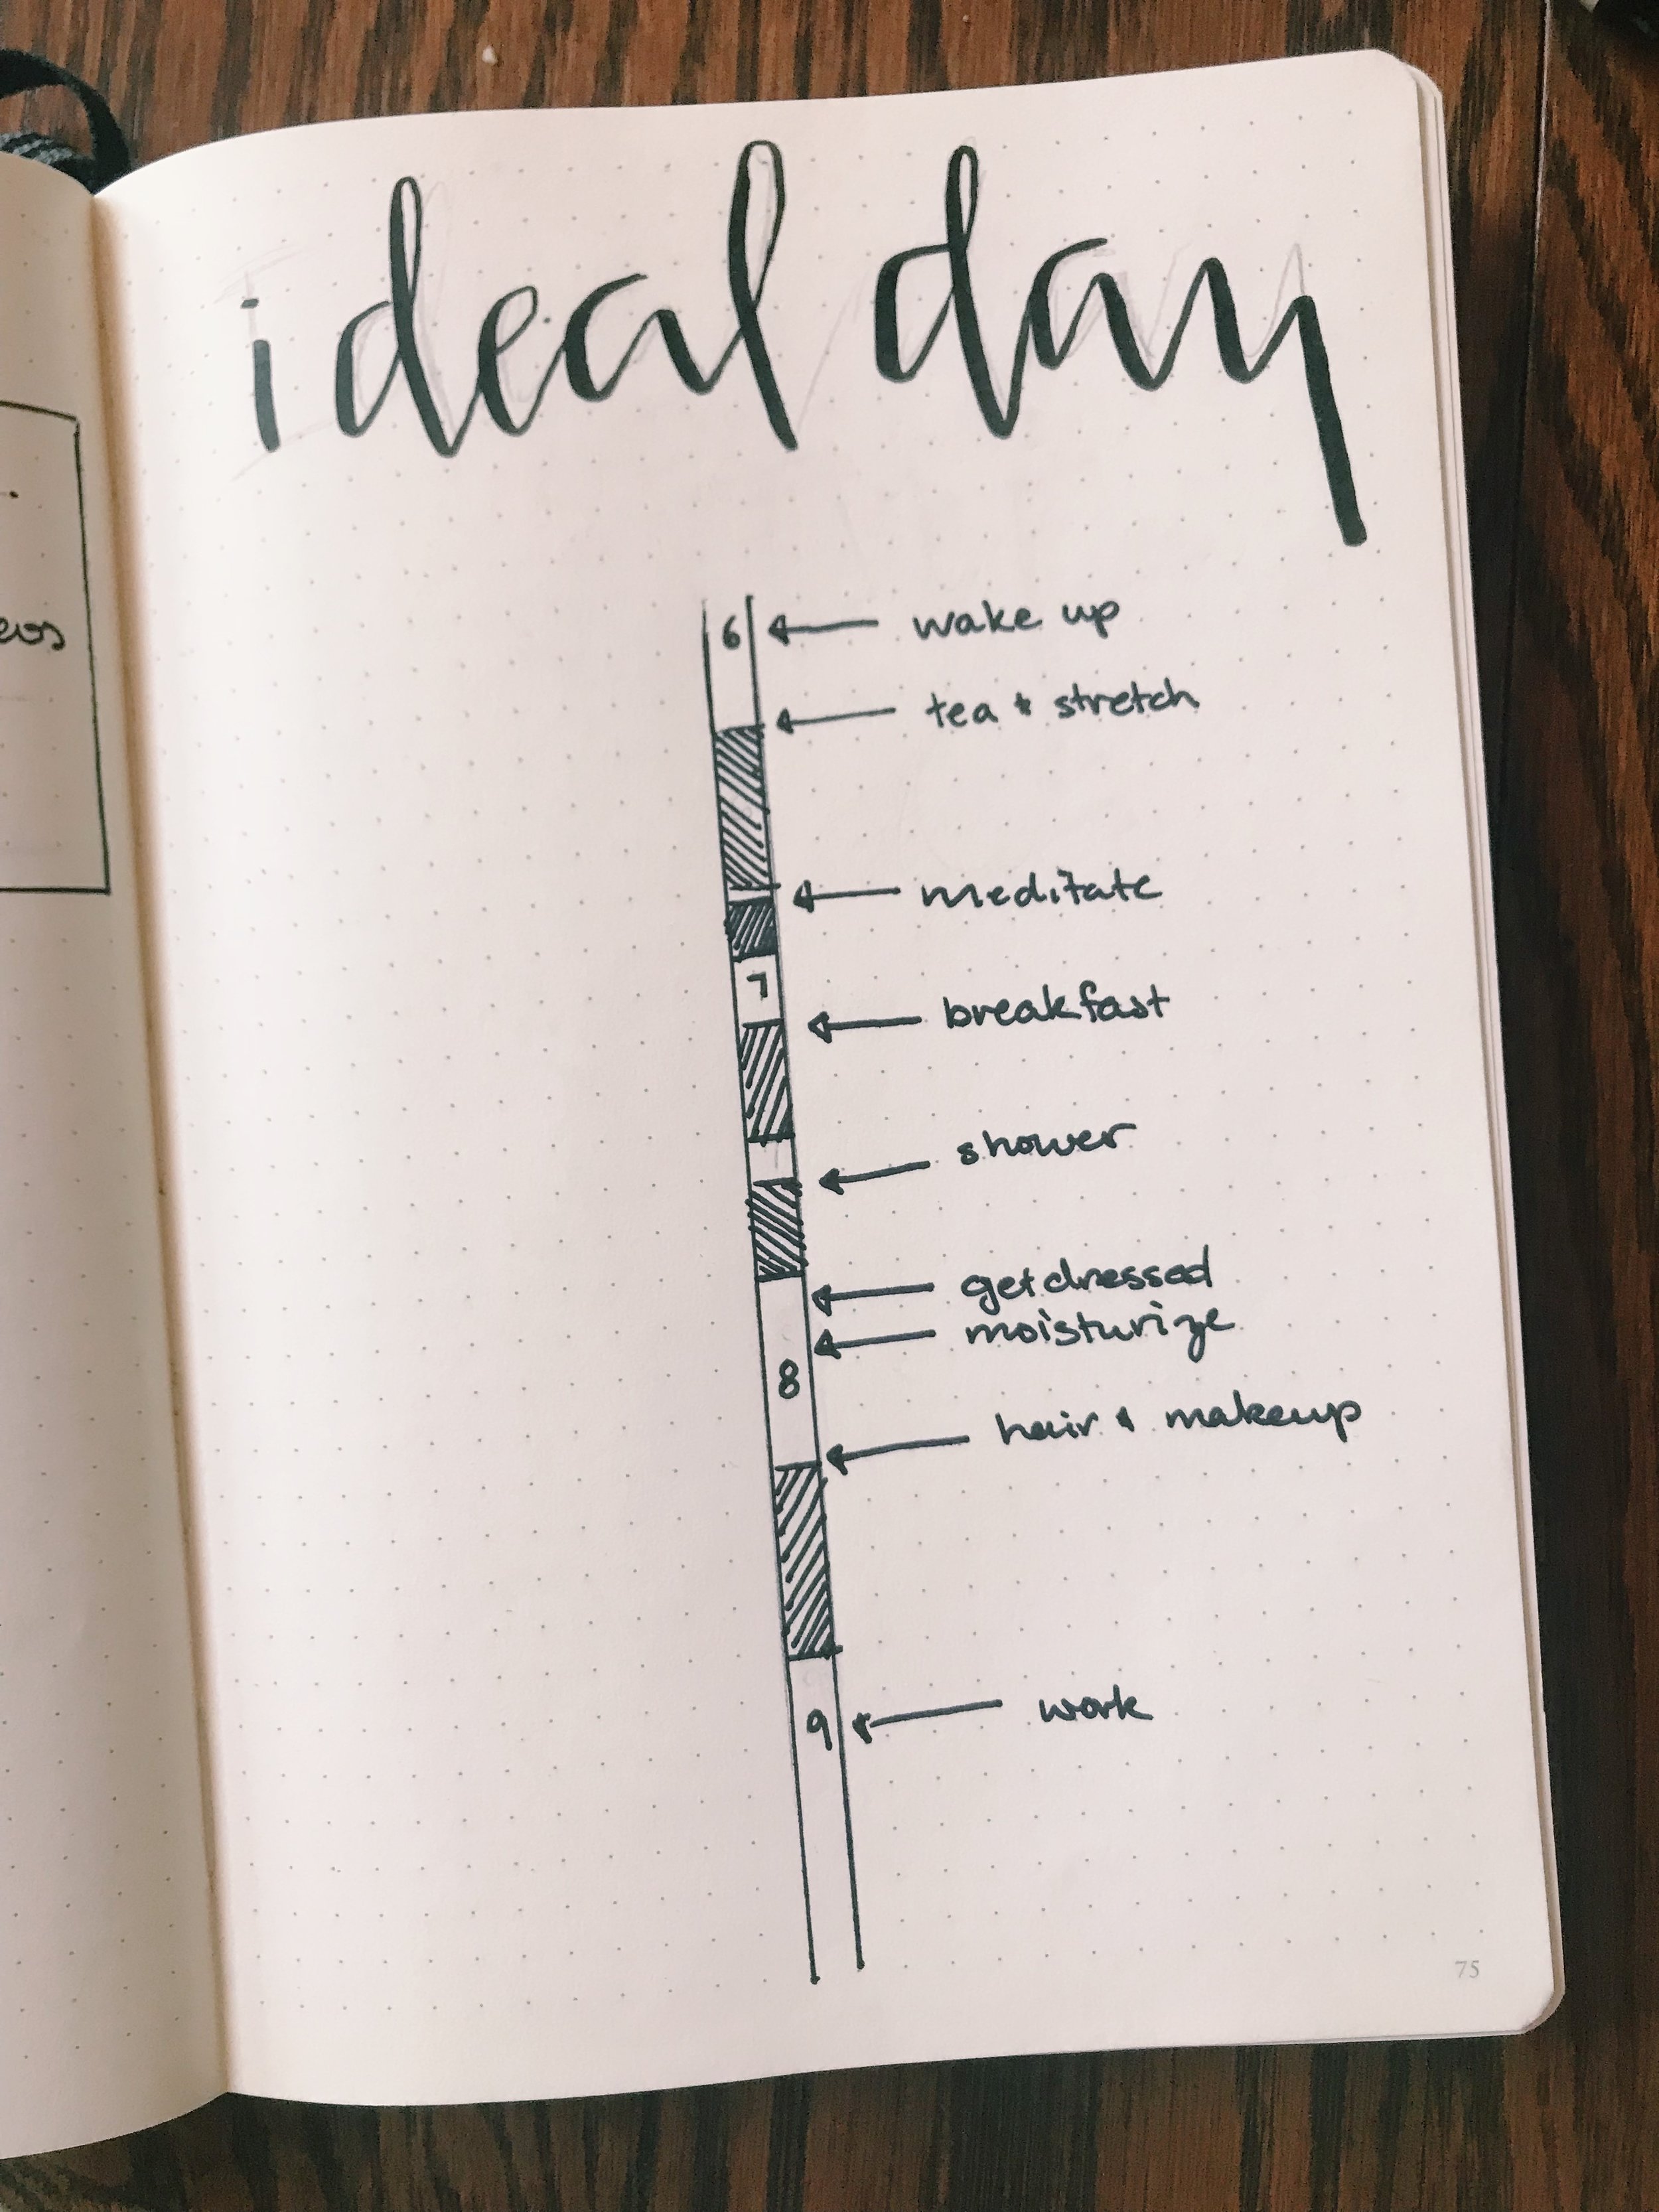 Perfecting the bullet journal